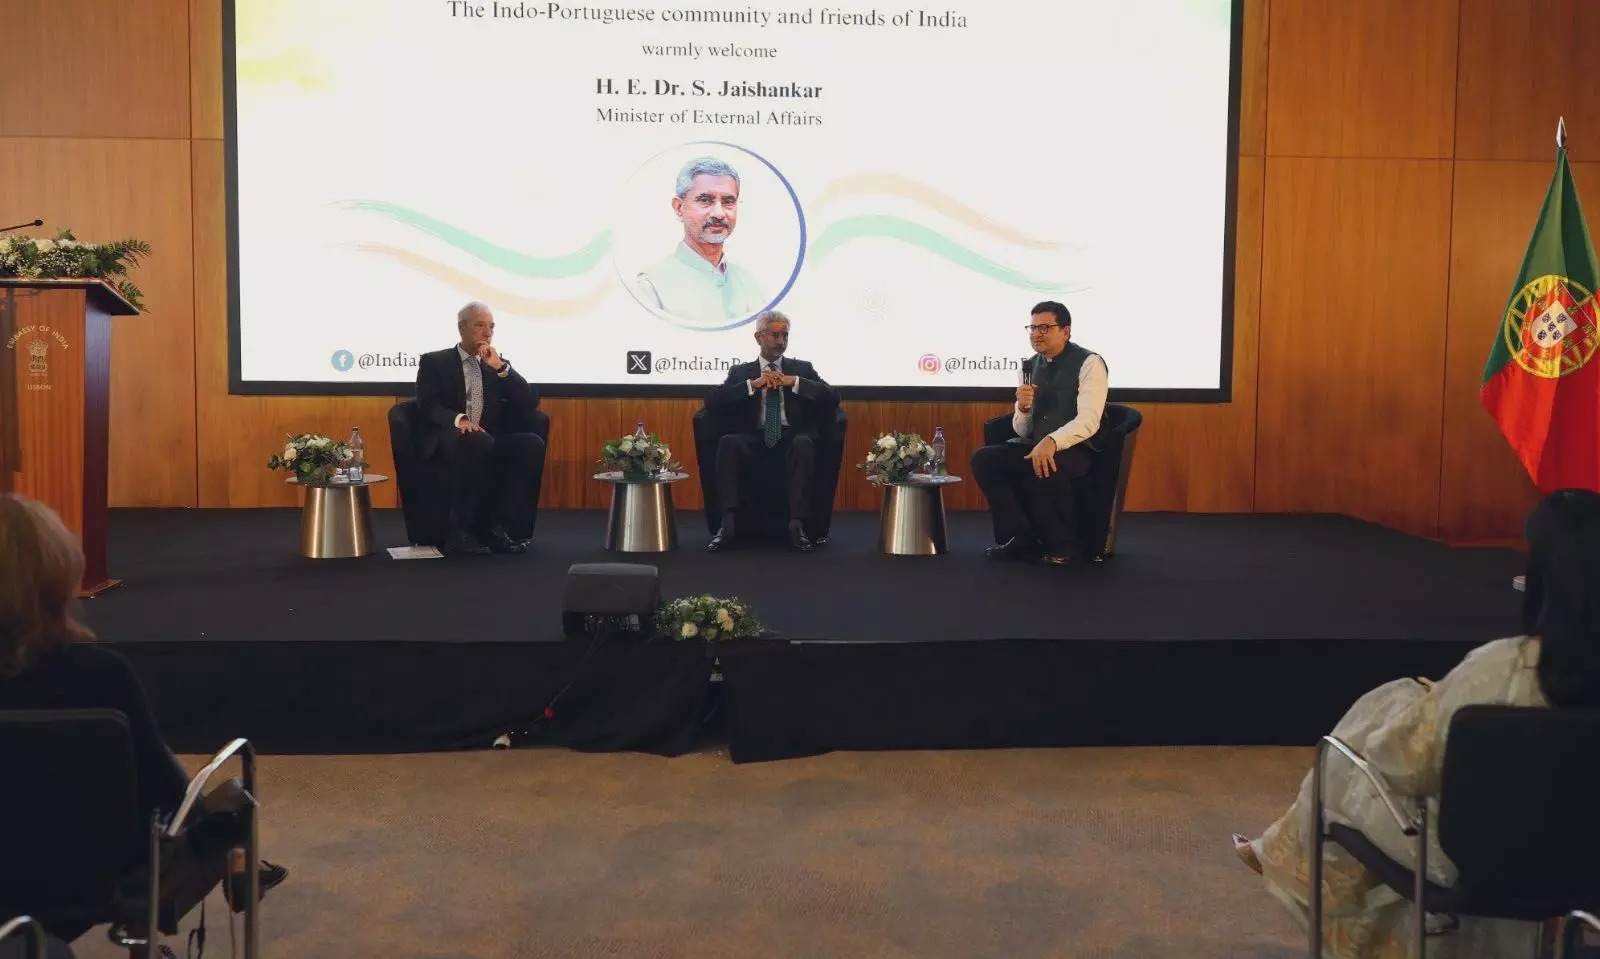 EAM Jaishankar stresses on direct air connectivity between India and Portugal to boost ties